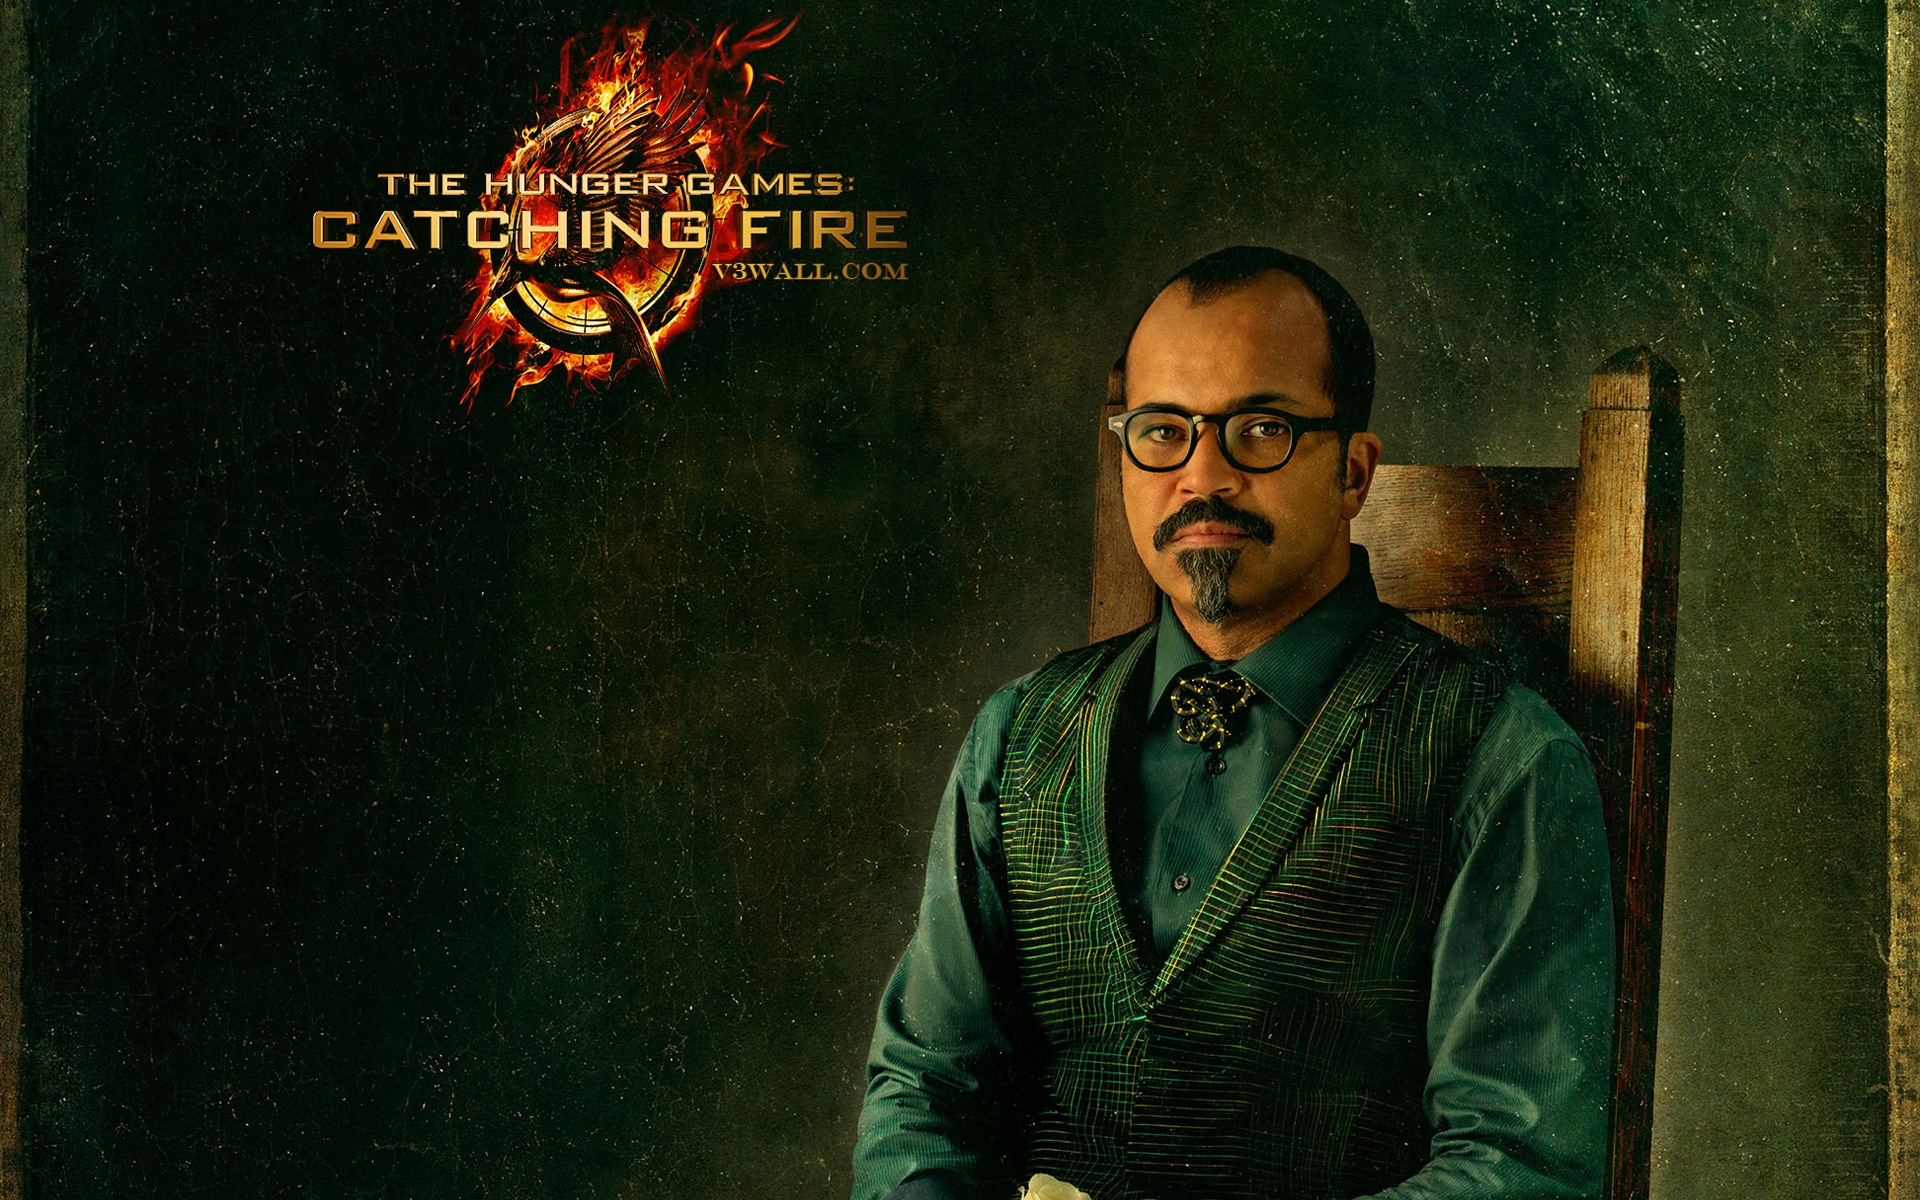 The Hunger Games: Catching Fire wallpapers HD #14 - 1920x1200